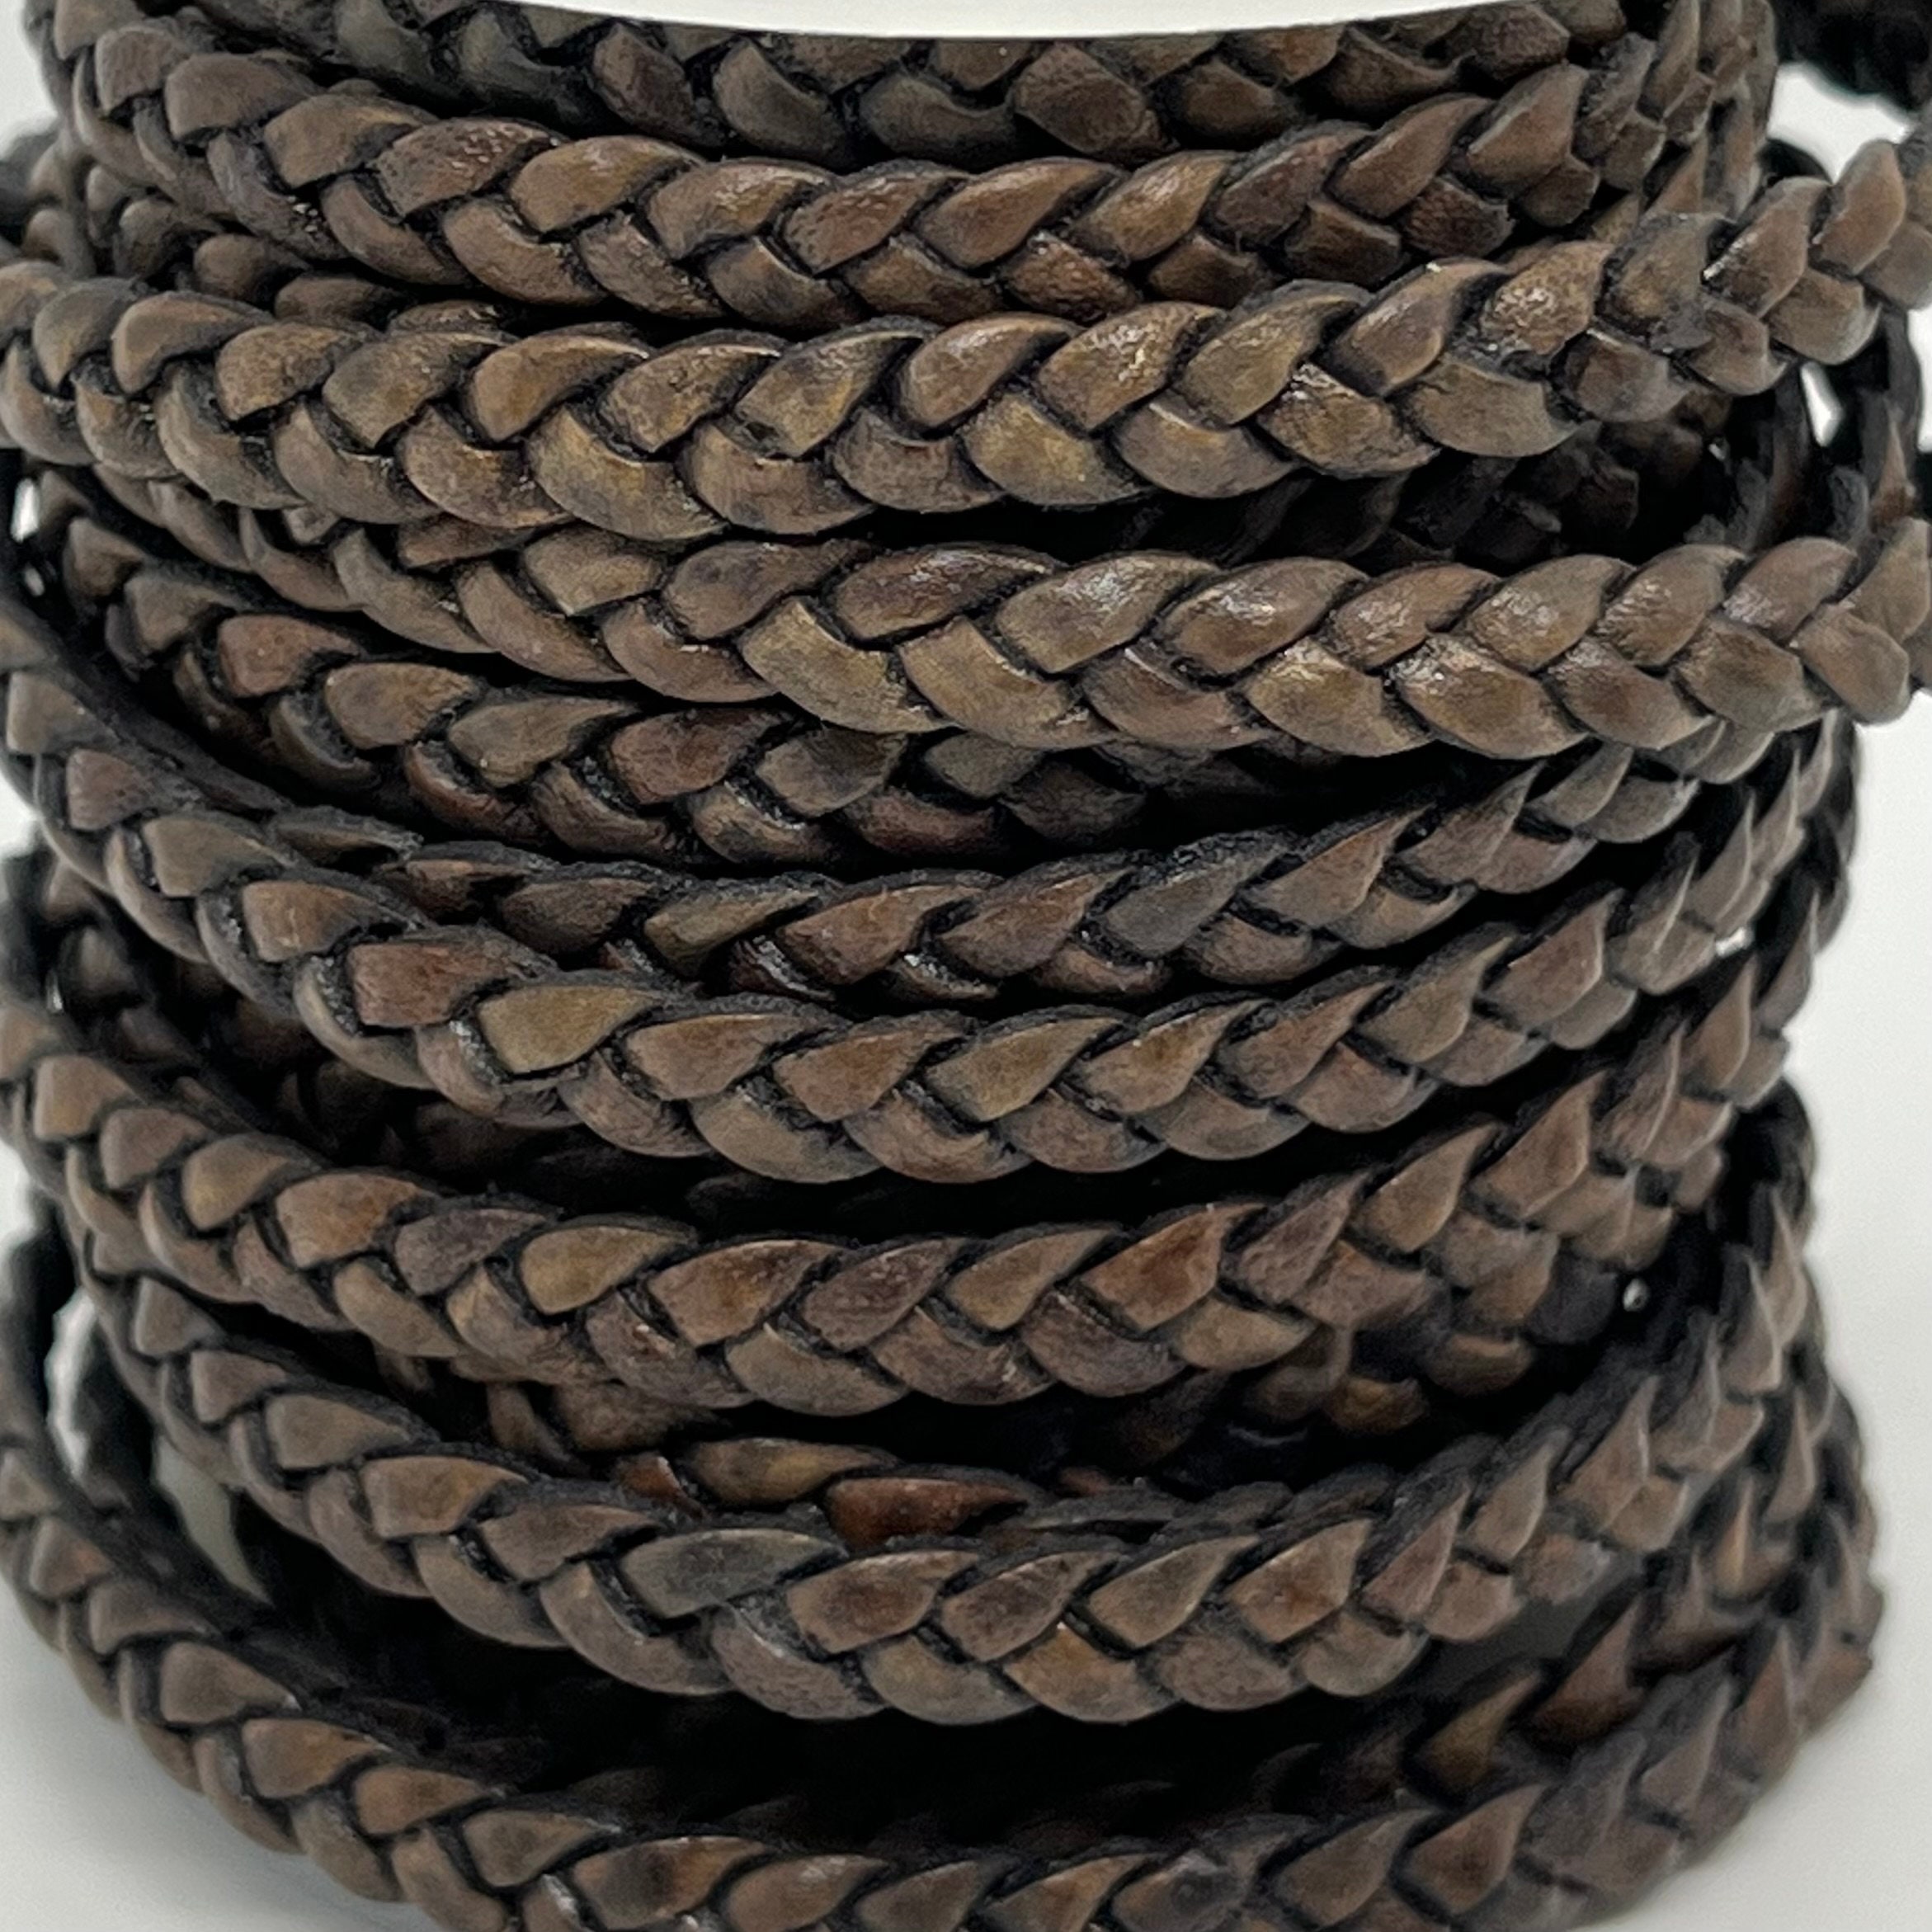 Metallic 2mm Leather Cords, Round Leather Cording Qty 4 Yards or 24 Yard  Spool, 12 Feet or 72 Feet Gray, Brown, Yellow Orange and Red 